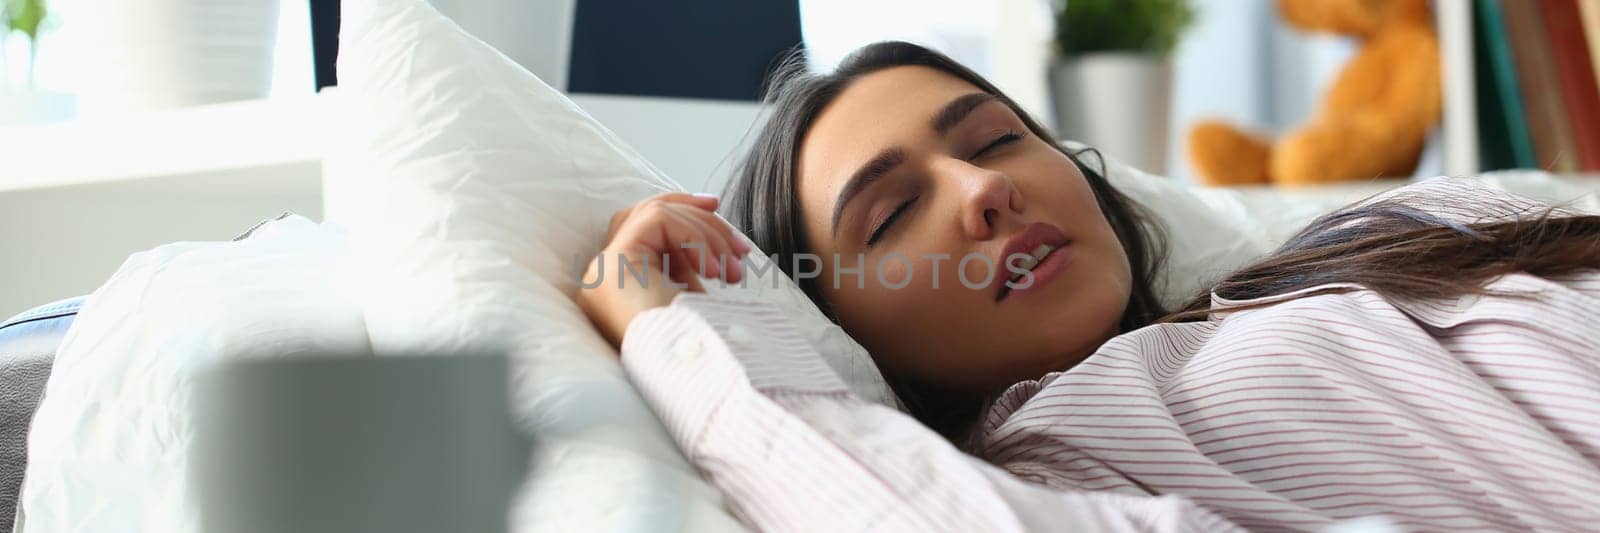 Beautiful young woman sleeping peacefully in bed by kuprevich